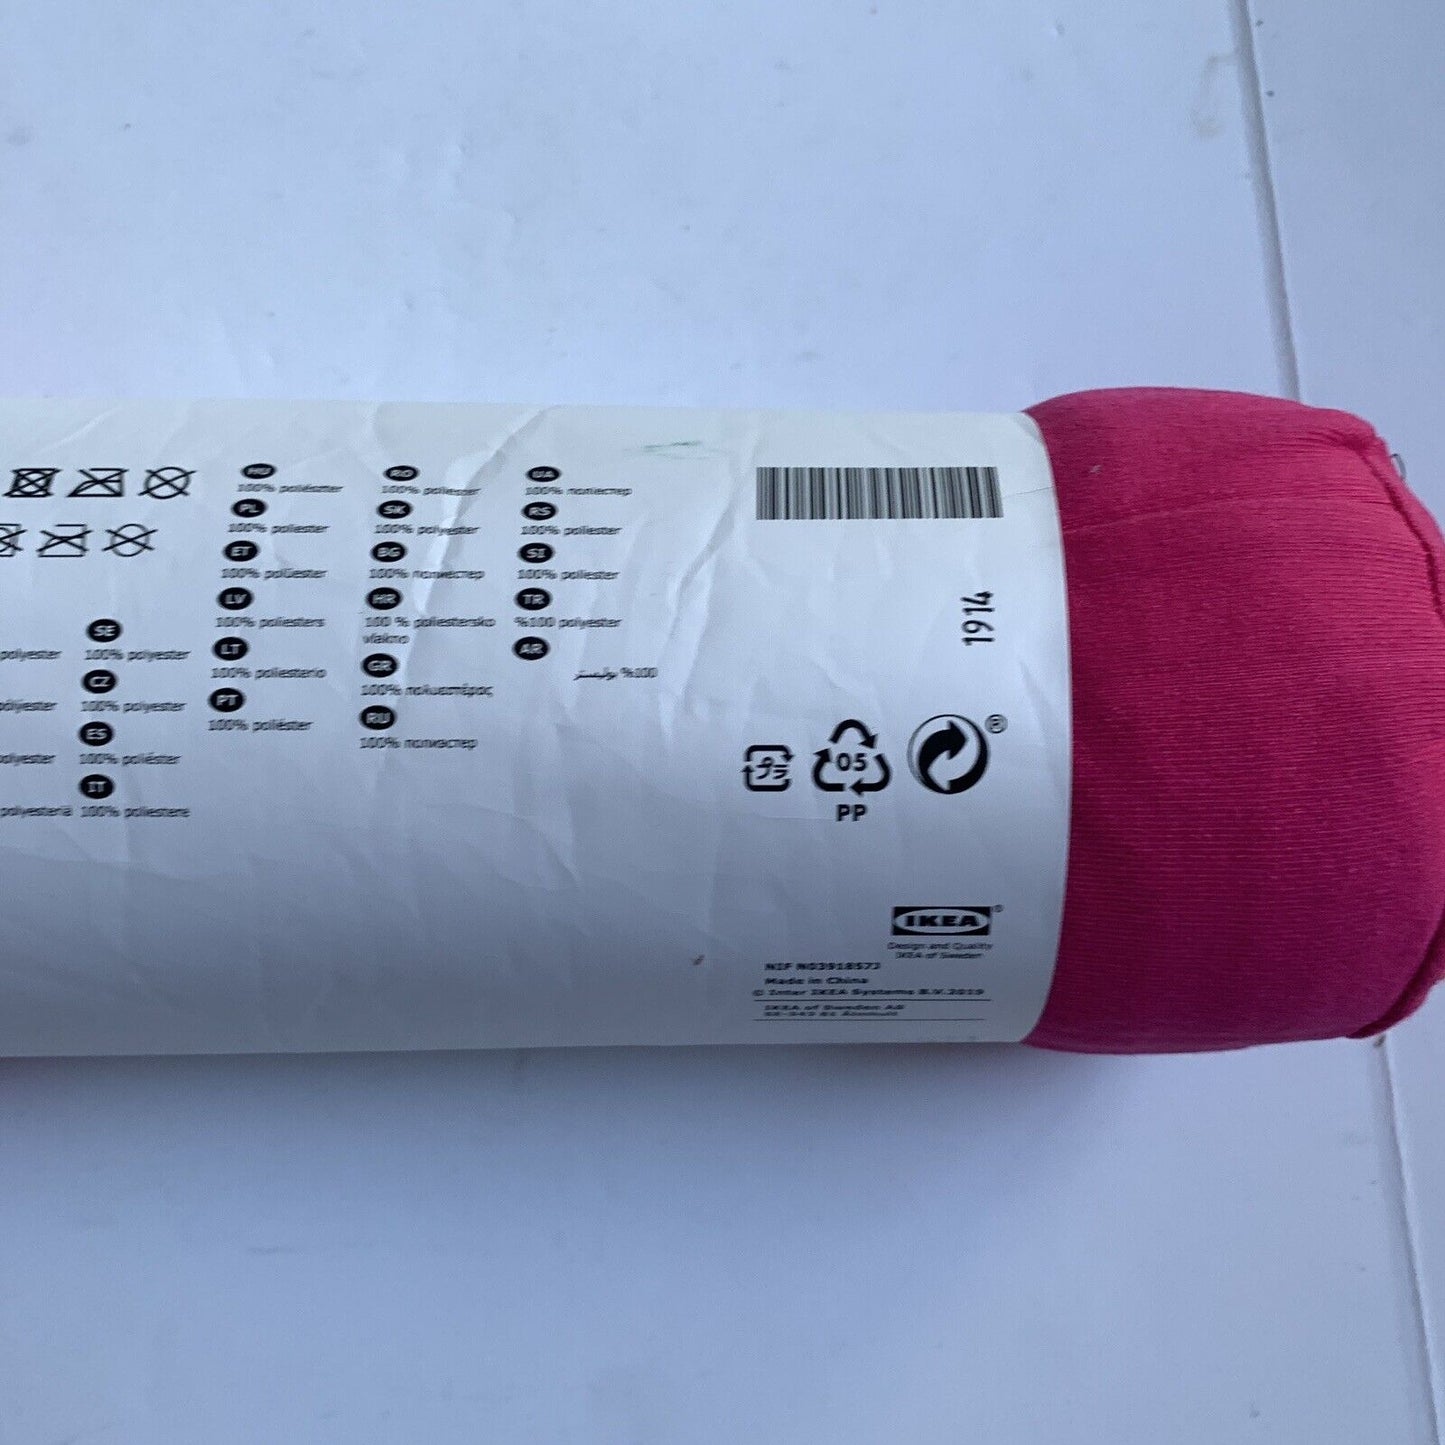 Ikea Oddhild Throw Blanket PINK New in Package 47 x 67"